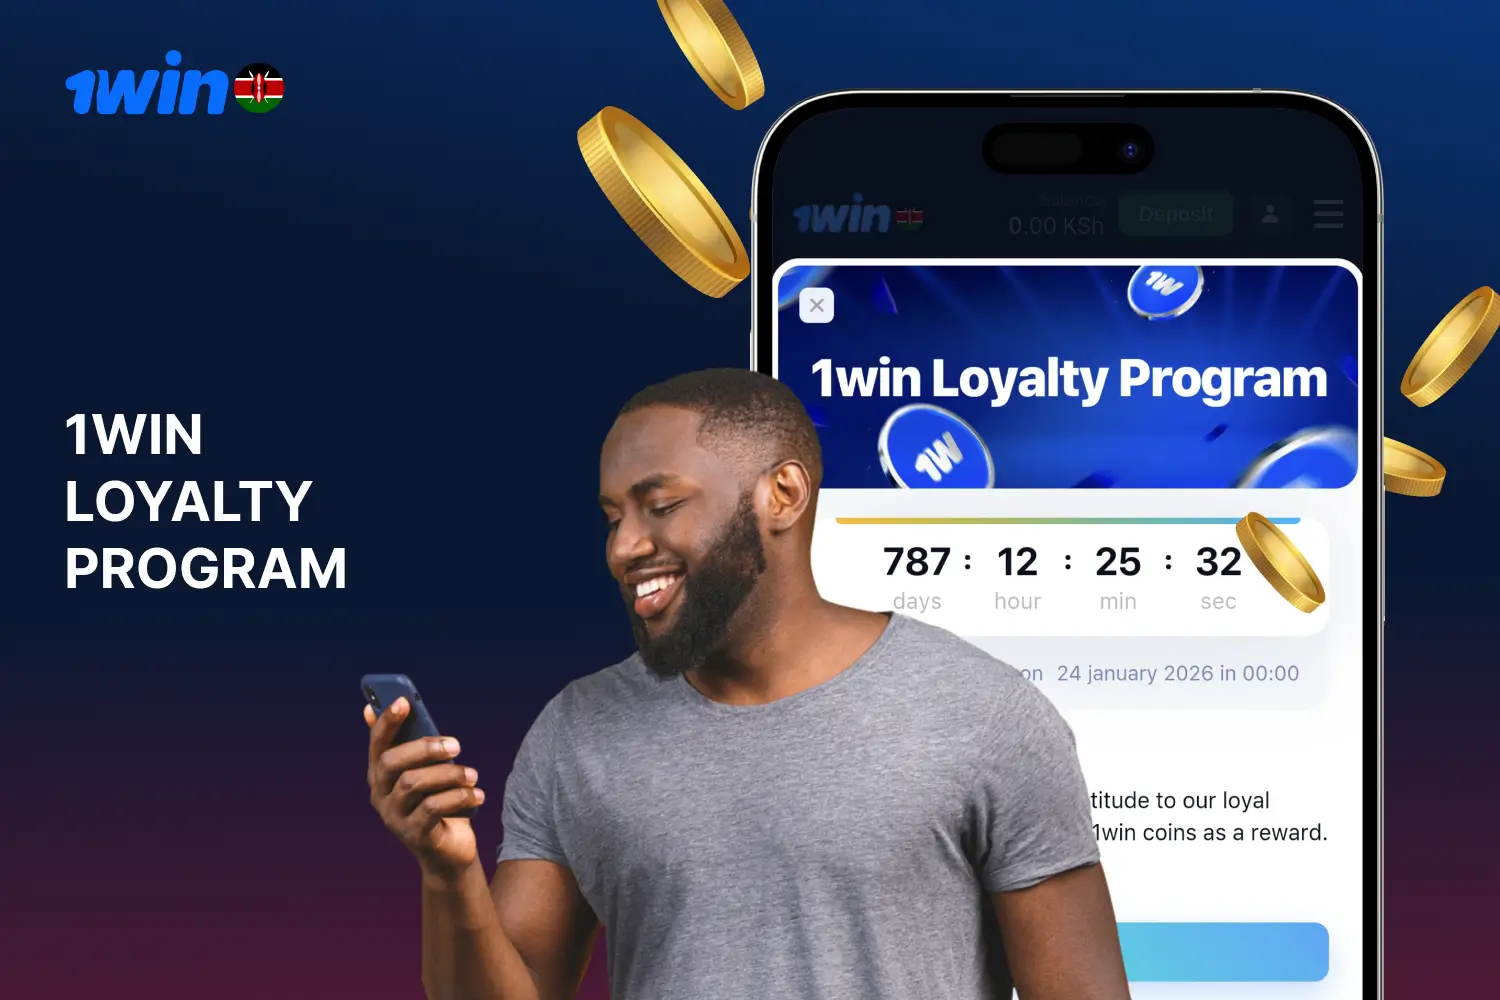 Kenyan players find the 1win casino loyalty program very engaging